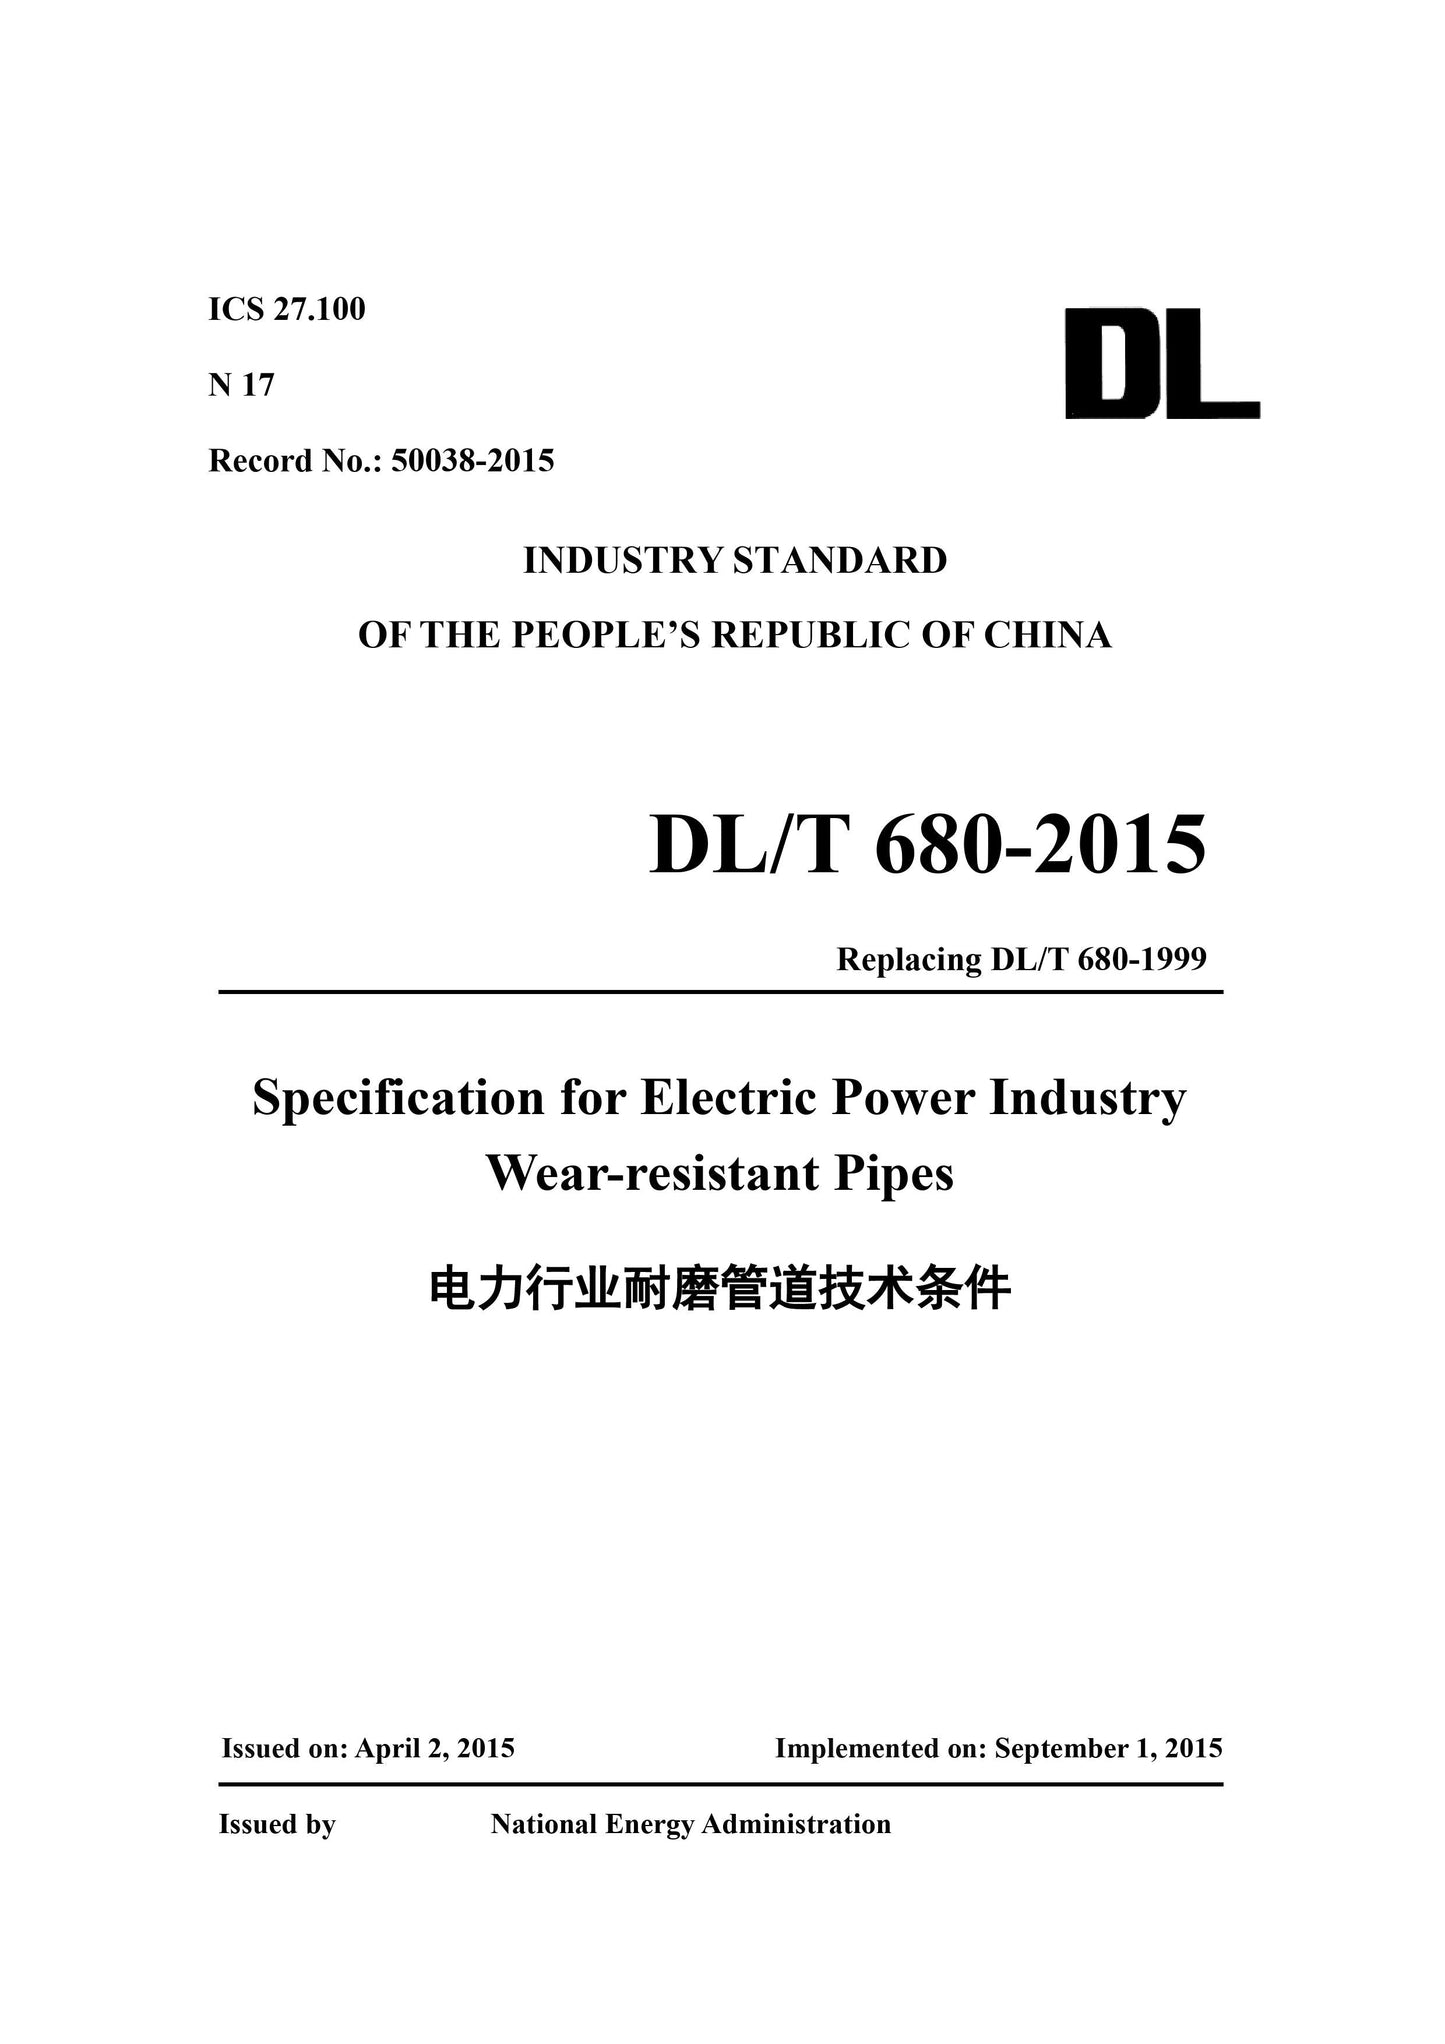 DL/T 680-2015 Page 1